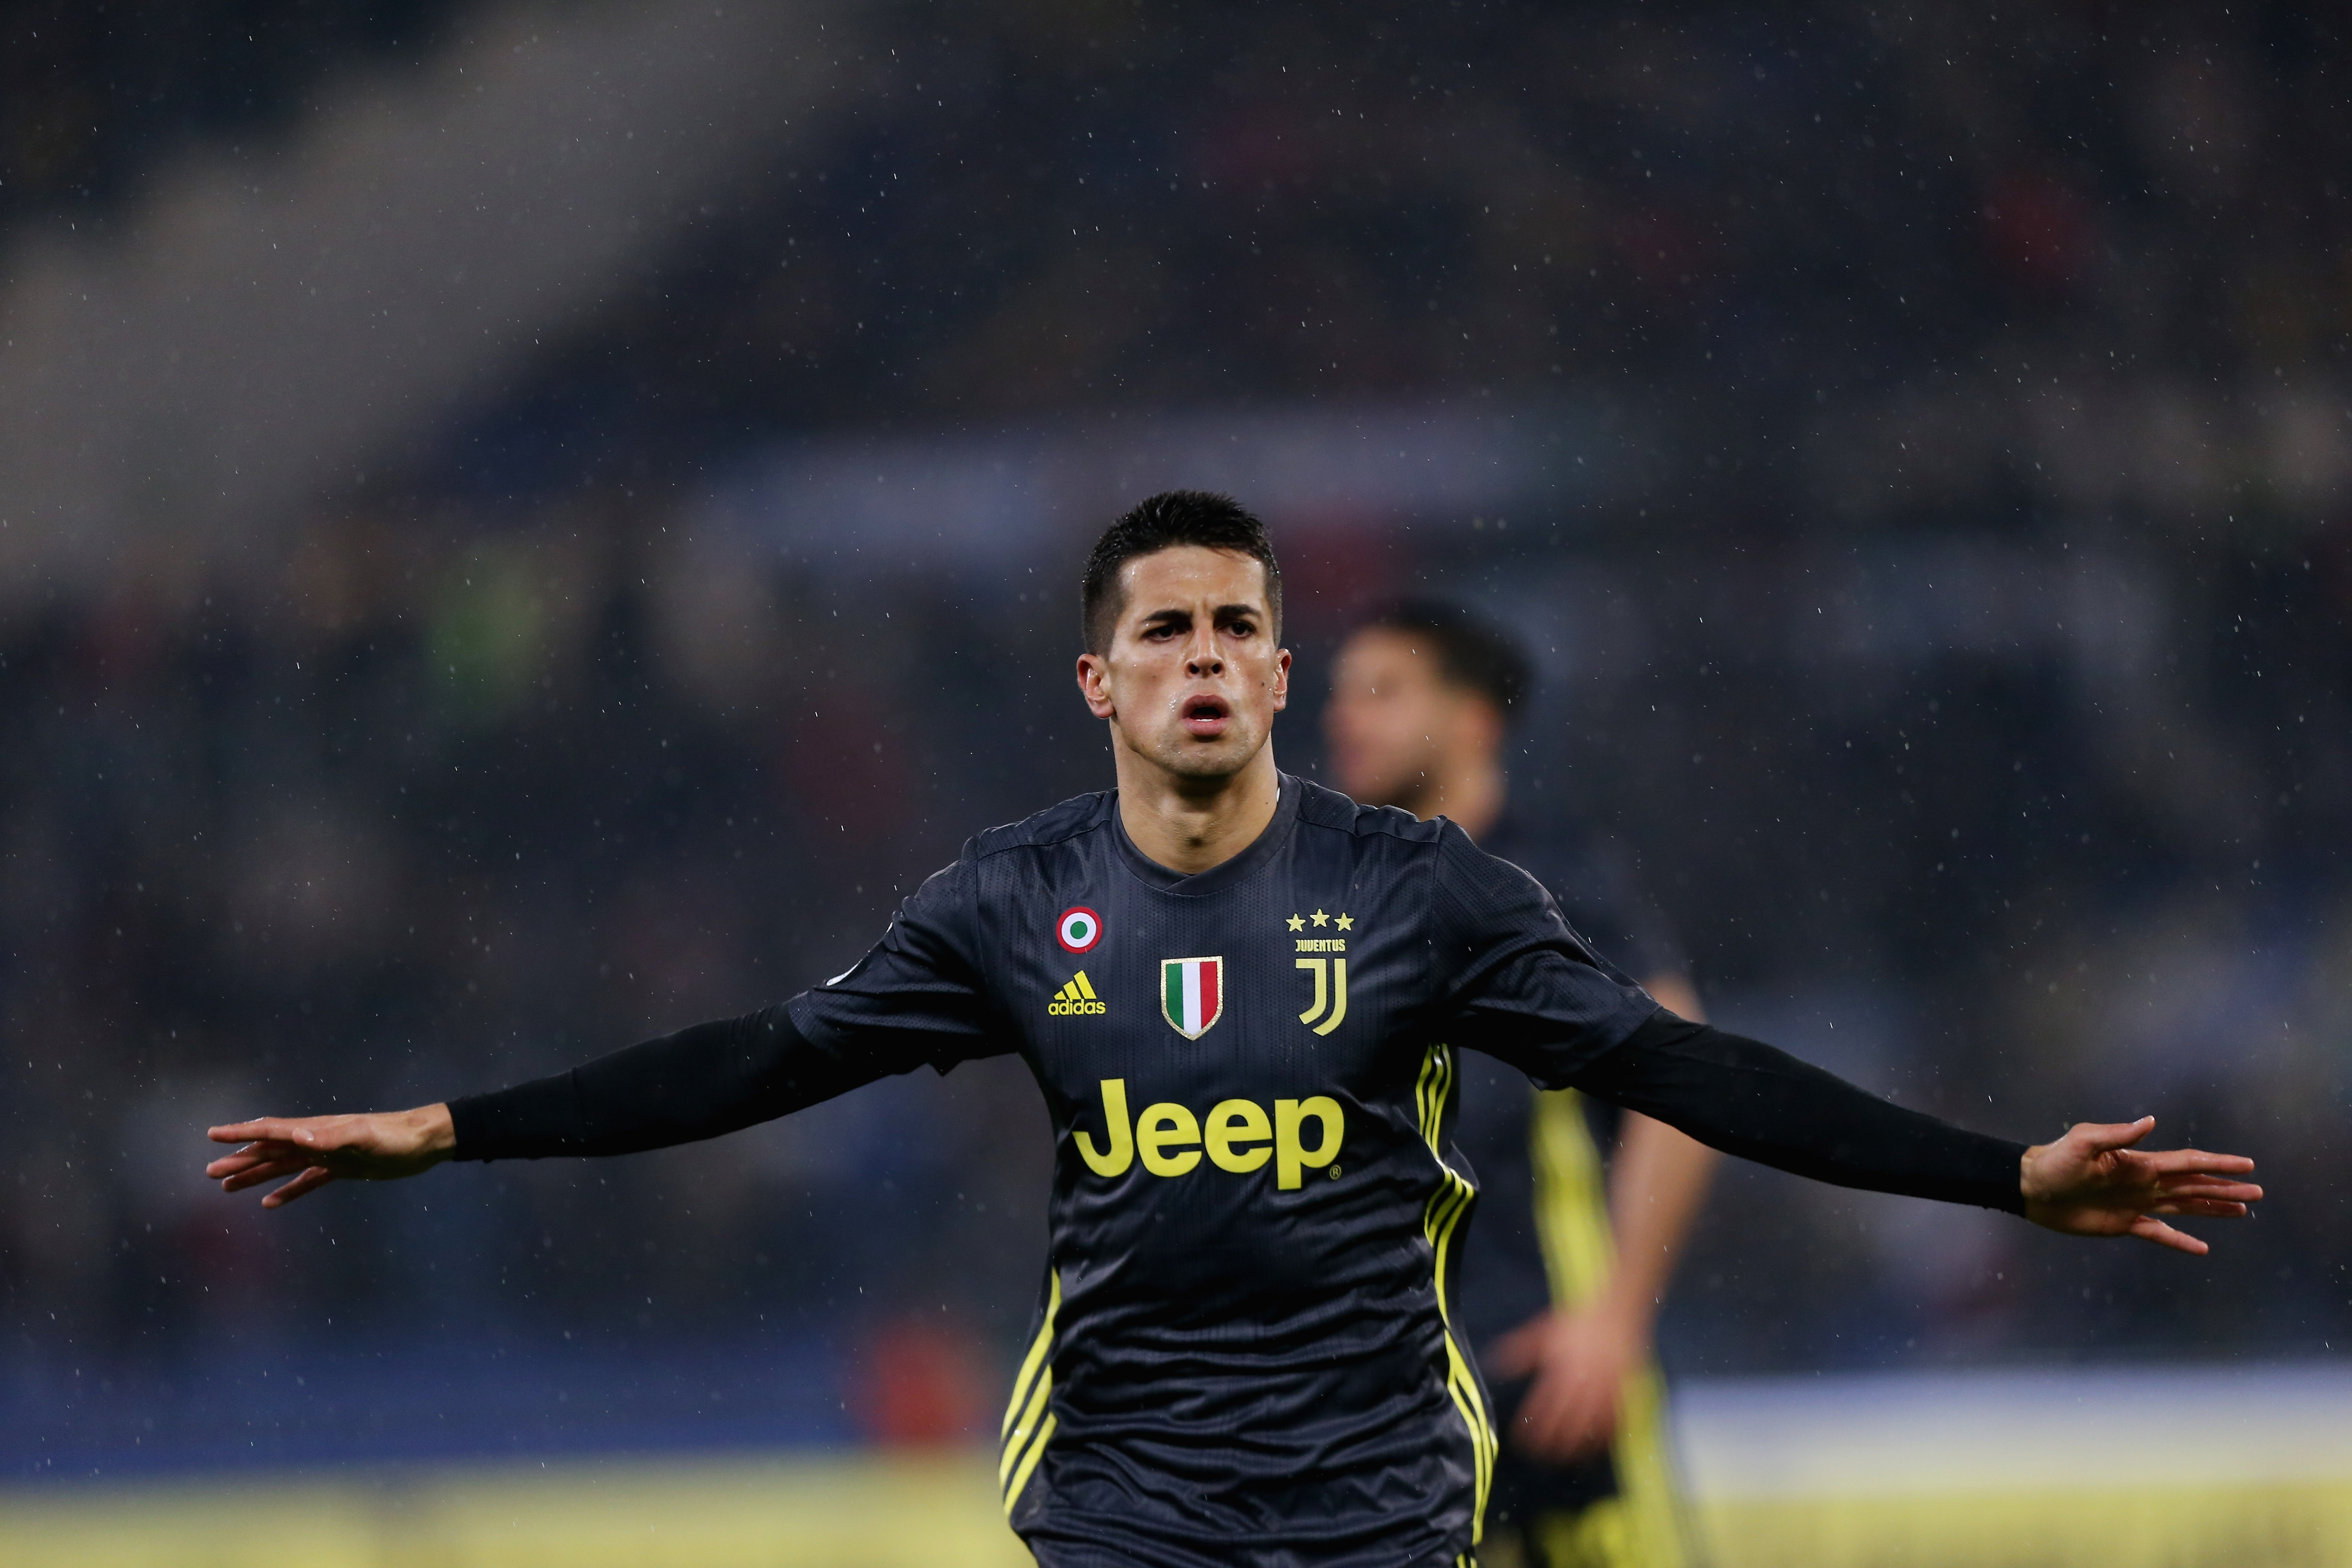 ROME, ITALY - JANUARY 27:  Joao Cancelo of Juventus celebrates after scoring the team's first goal during the Serie A match between SS Lazio and Juventus at Stadio Olimpico on January 27, 2019 in Rome, Italy.  (Photo by Paolo Bruno/Getty Images)